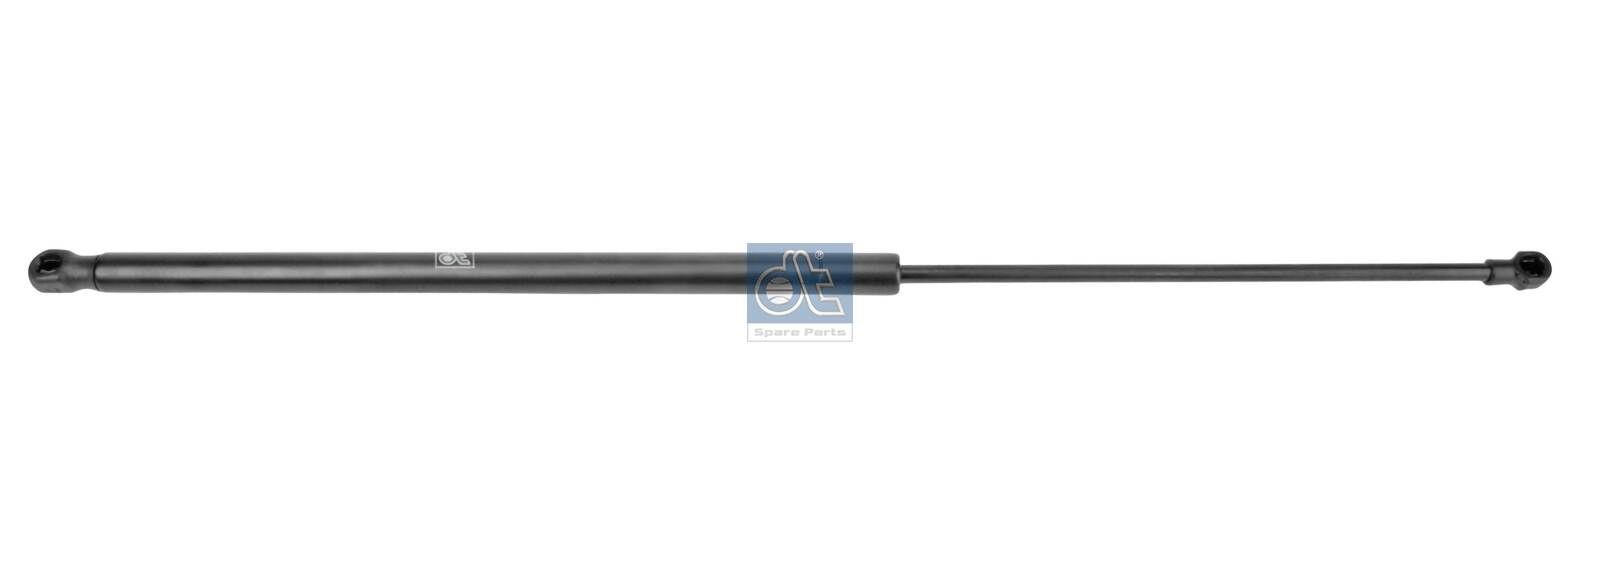 438828 DT Spare Parts 400N, 630 mm Gas Spring 6.70050 buy